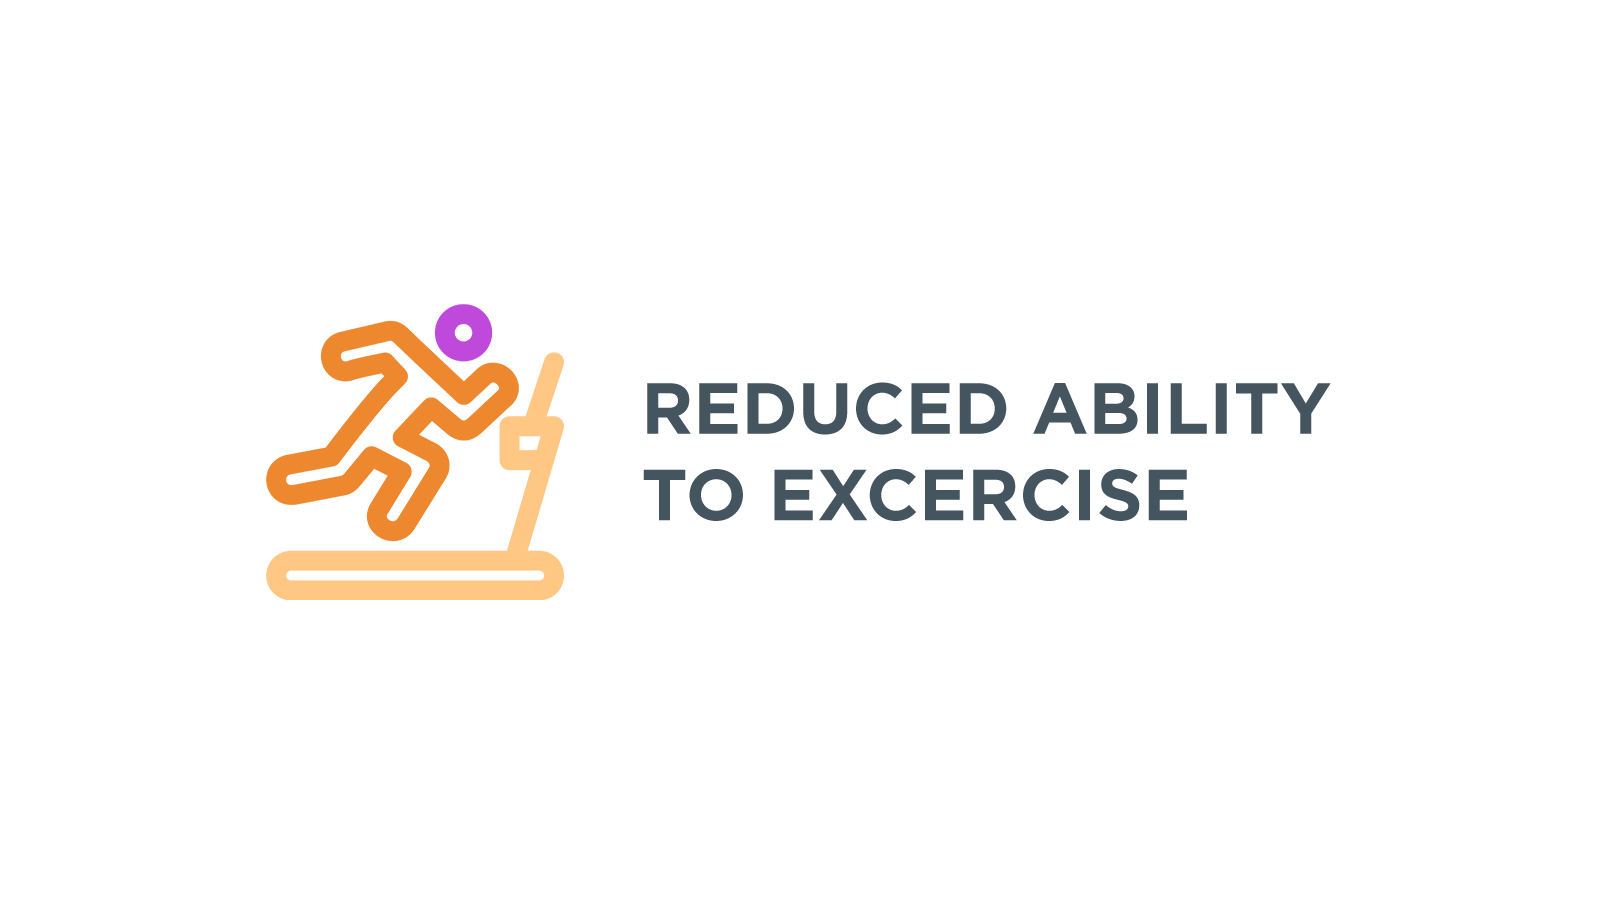 AFib Symptoms: Reduced Ability to Exercise